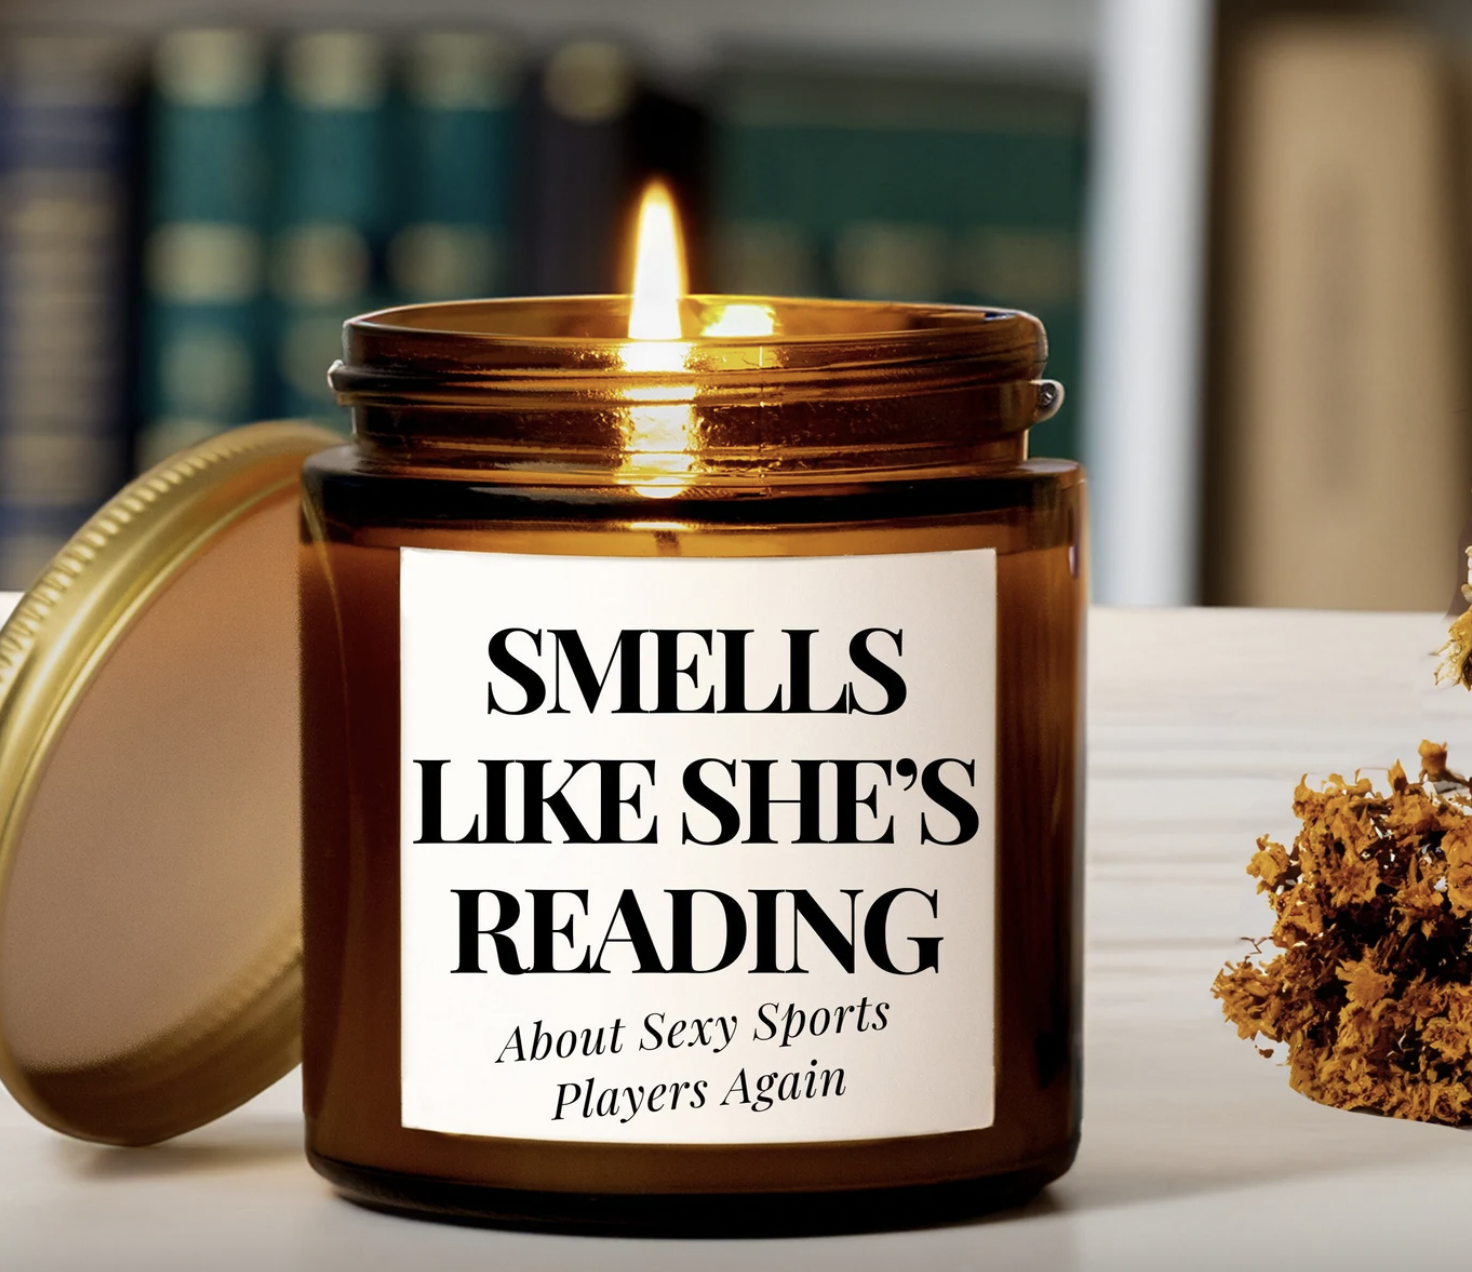 image of a candle in an amber glass jar with a label that says "smells like she's reading about sexy sports players again"